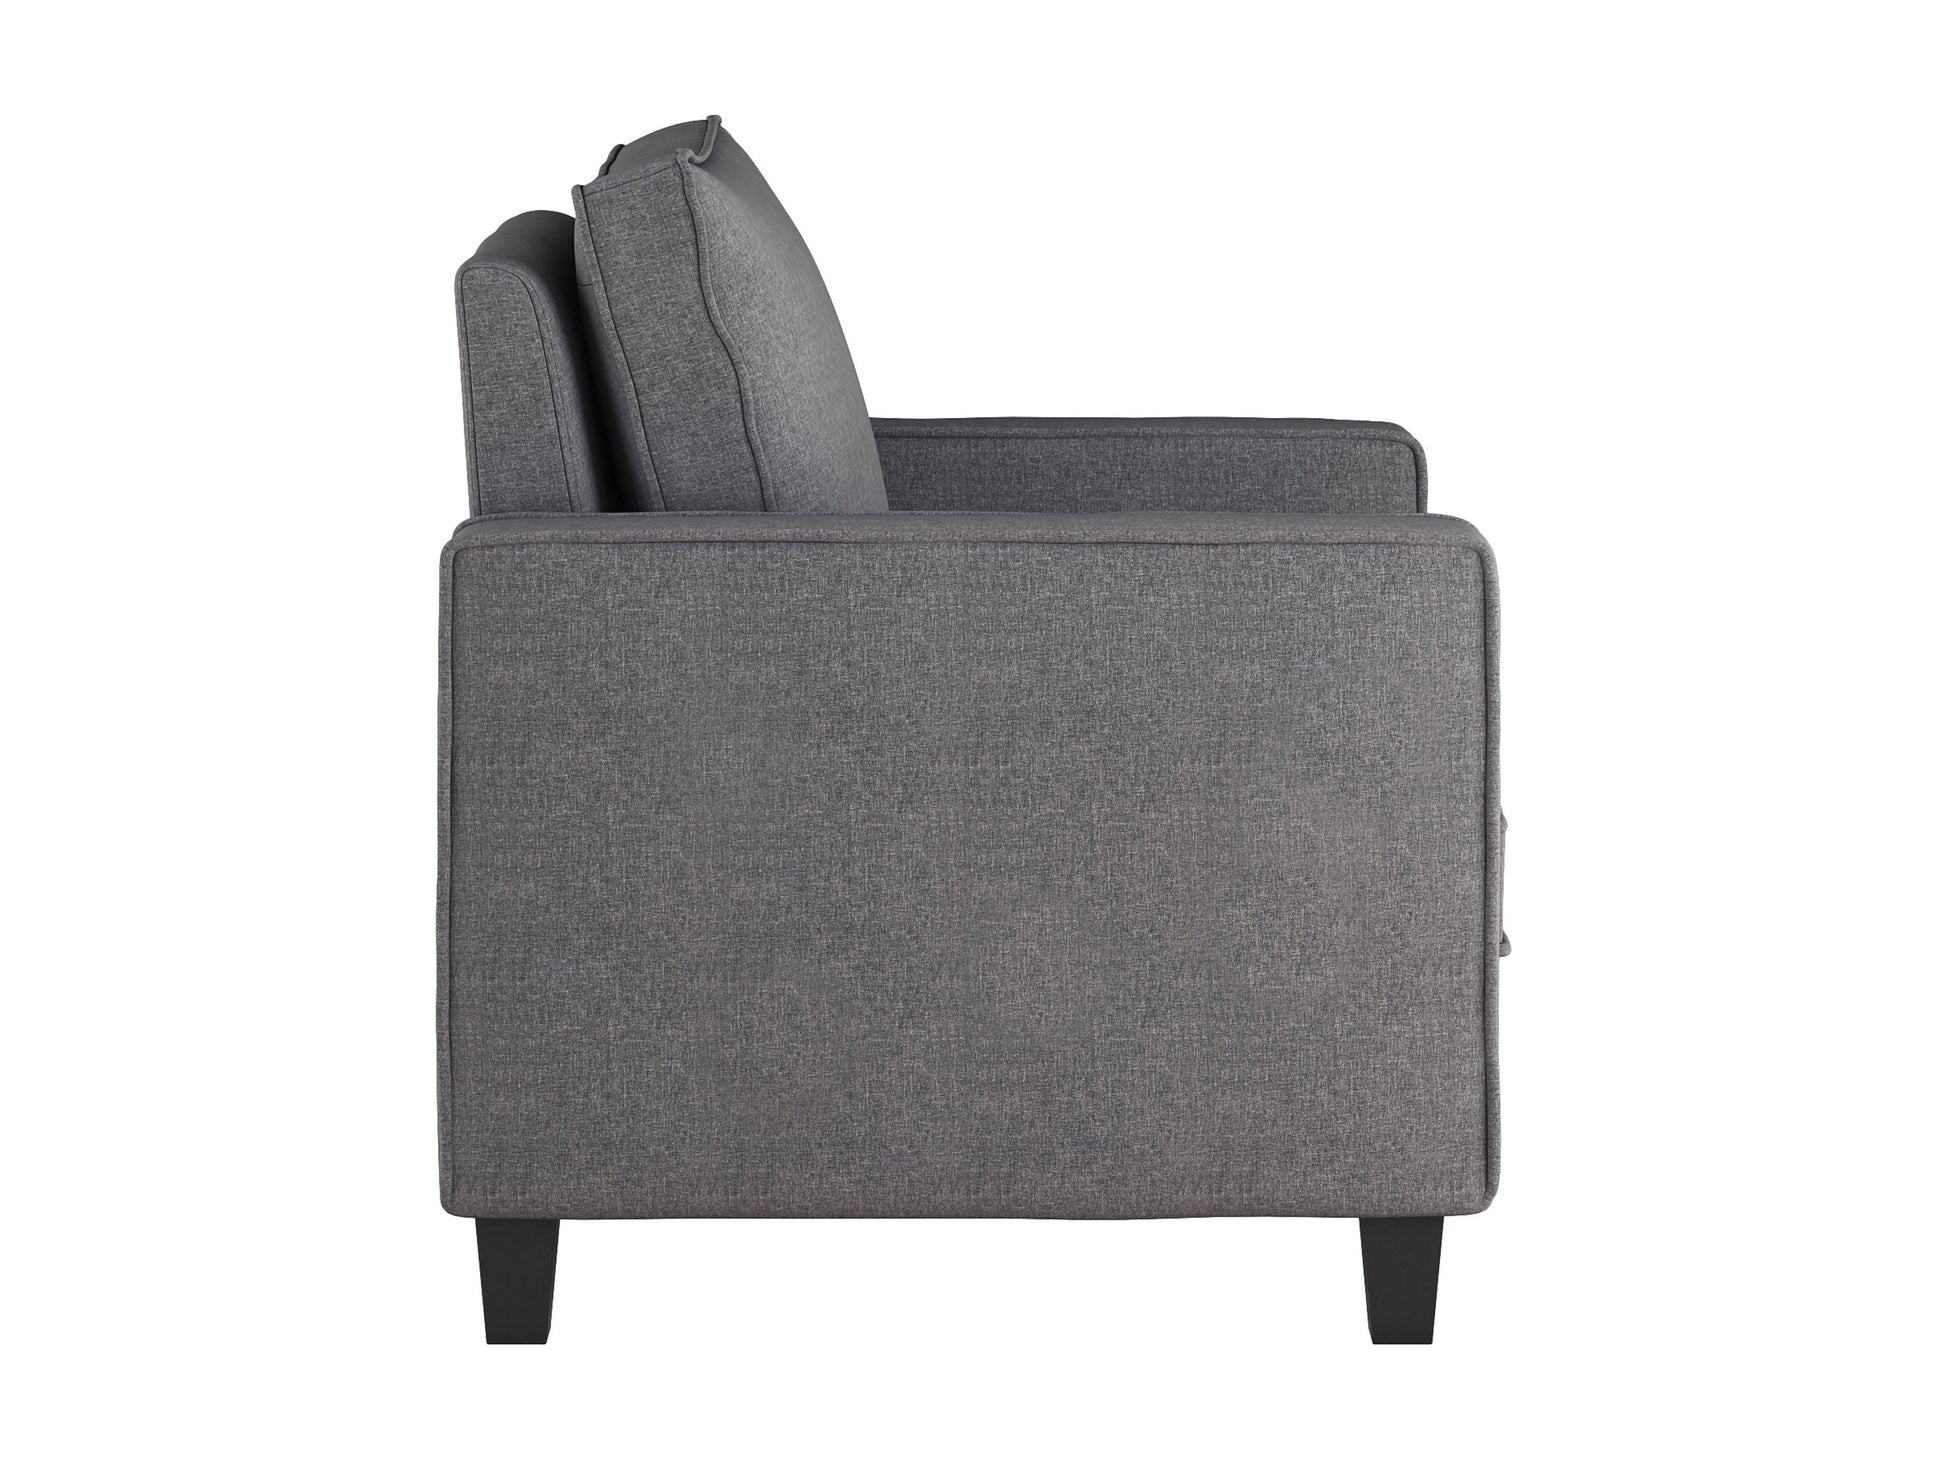 grey Mid-Century Modern Armchair Georgia Collection product image by CorLiving#color_georgia-grey